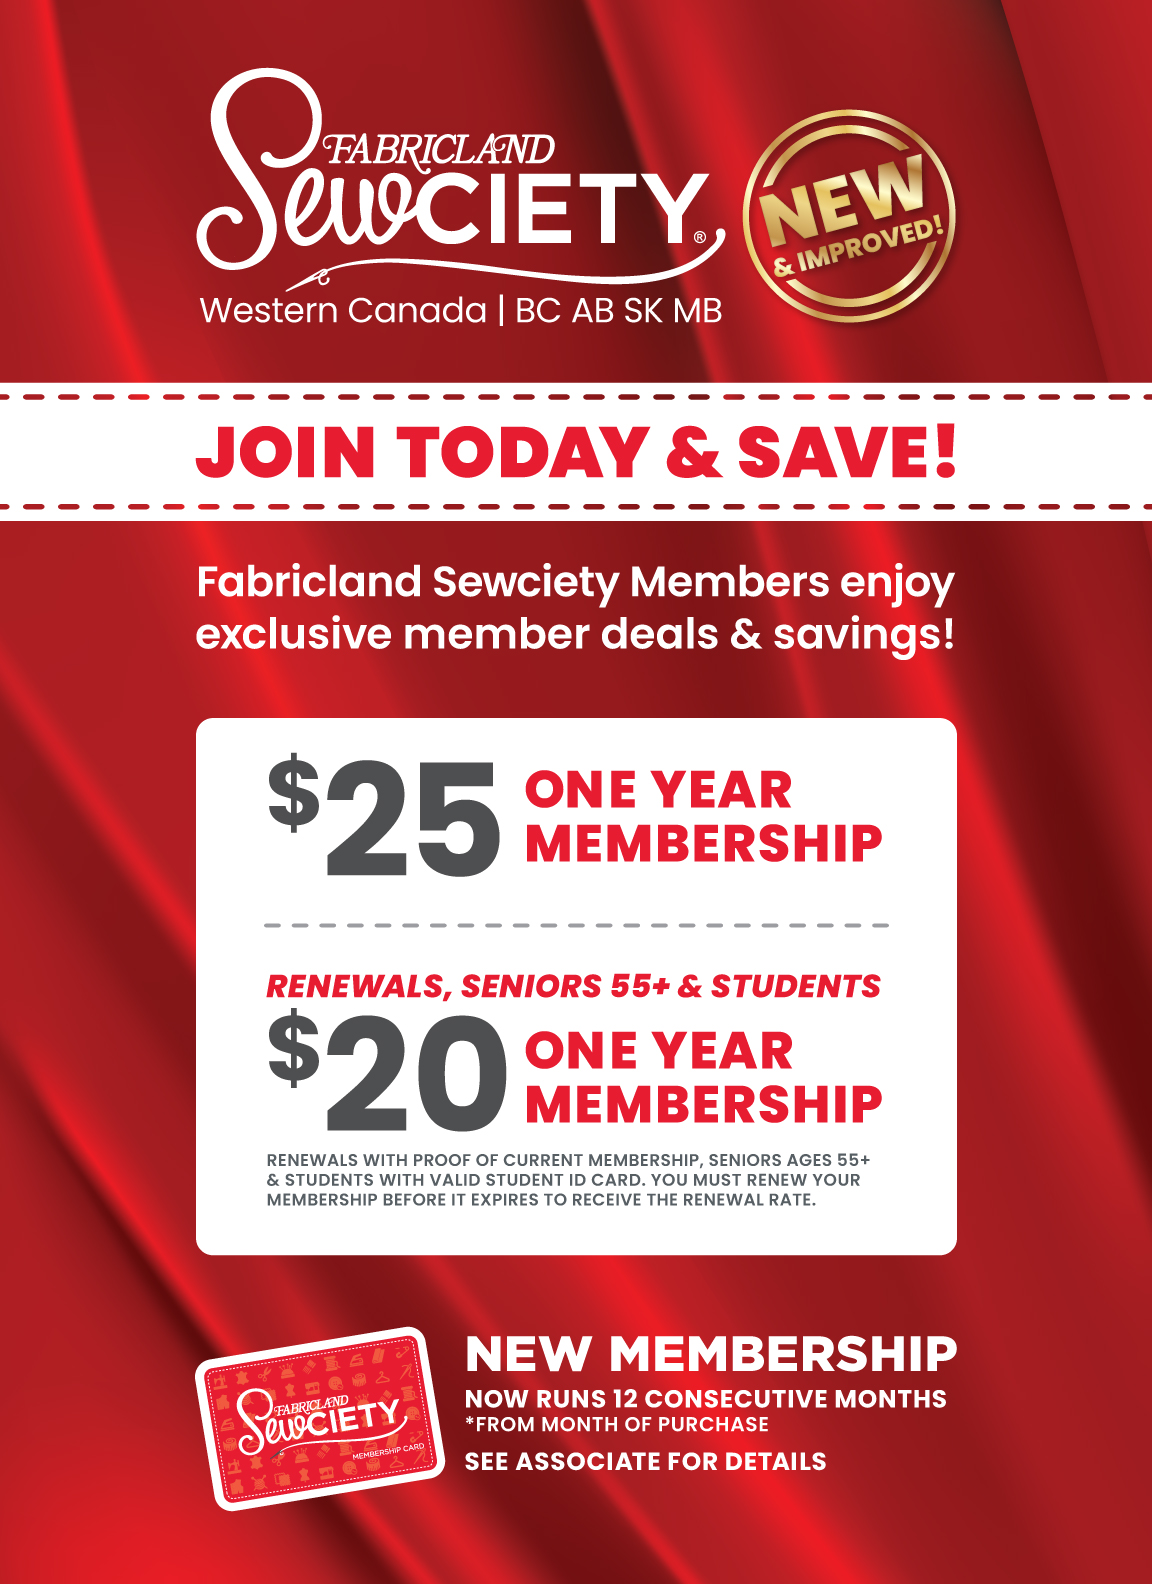 Fabricland Sewciety members receive up to 50% off regular price on specific items - view term & conditions of membership